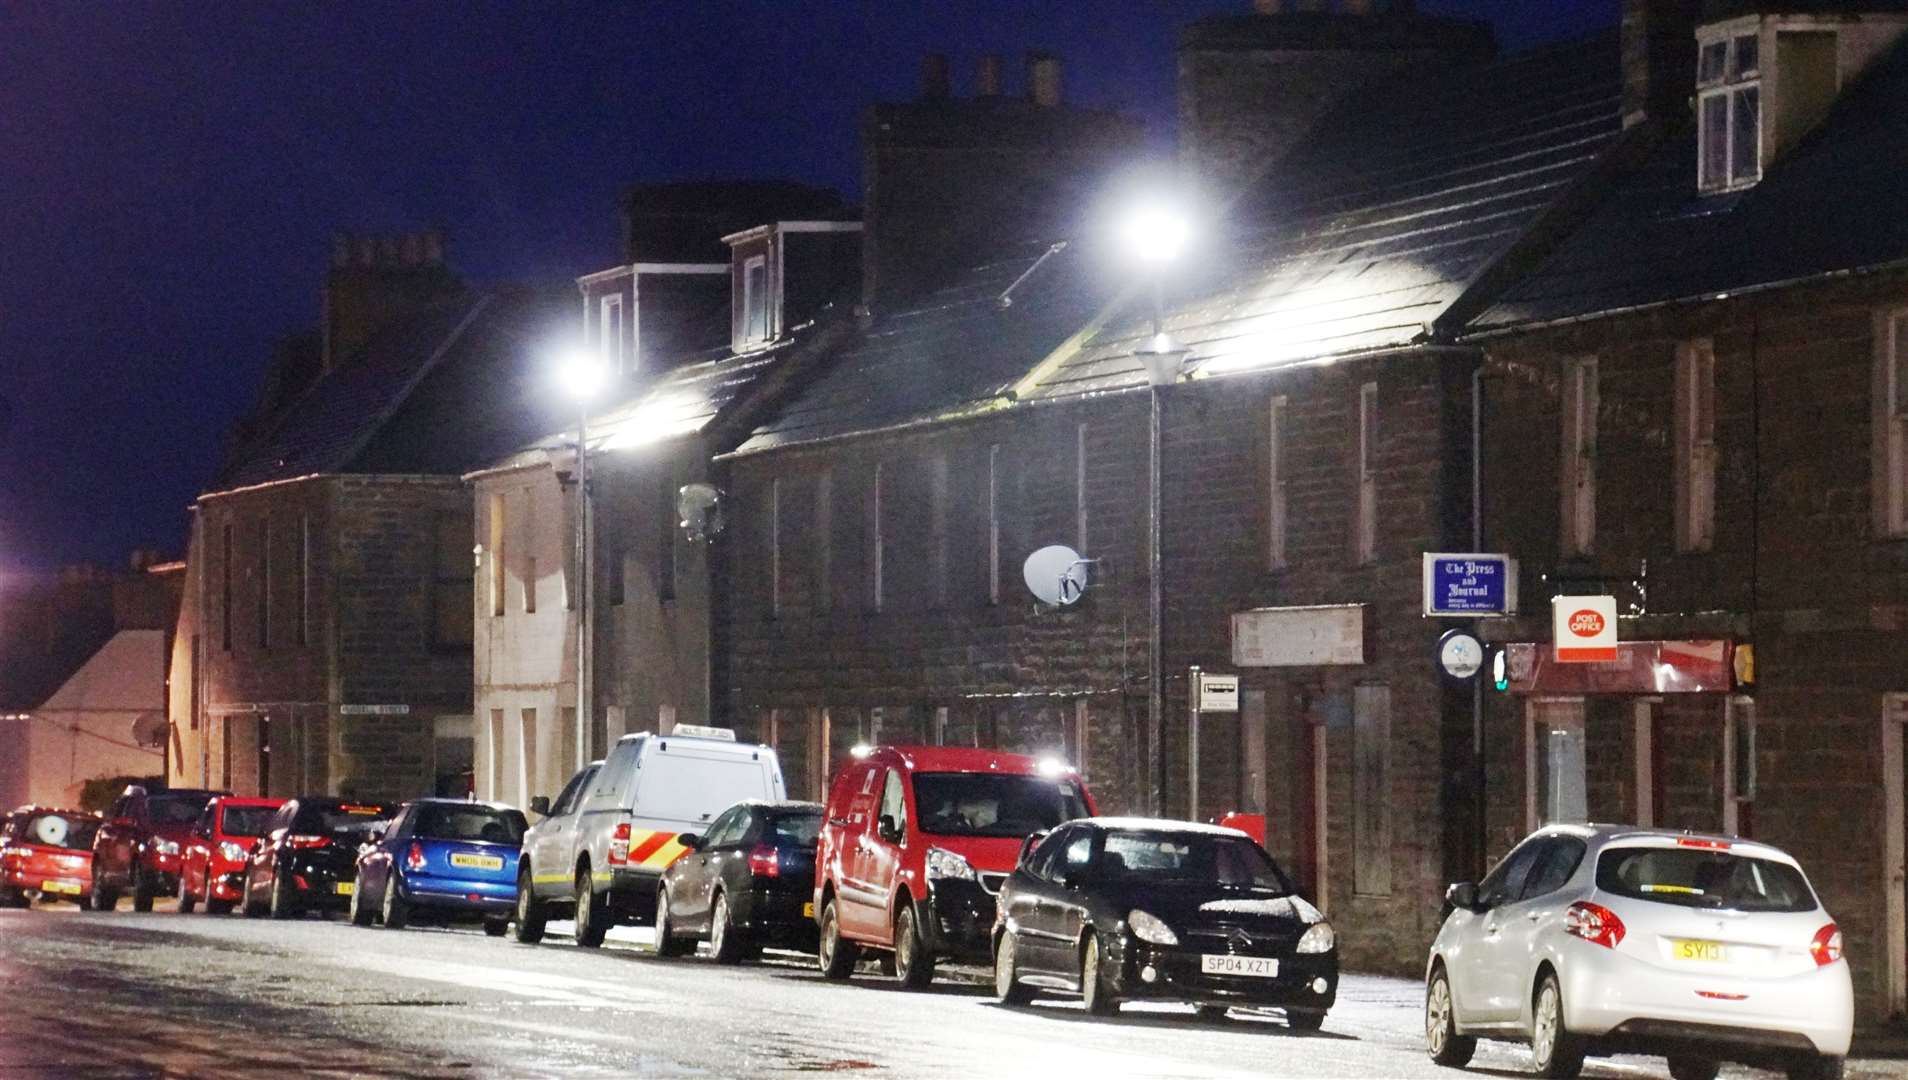 New street-lighting in Lybster has been criticised for illuminating house roofs more than the pavement below.